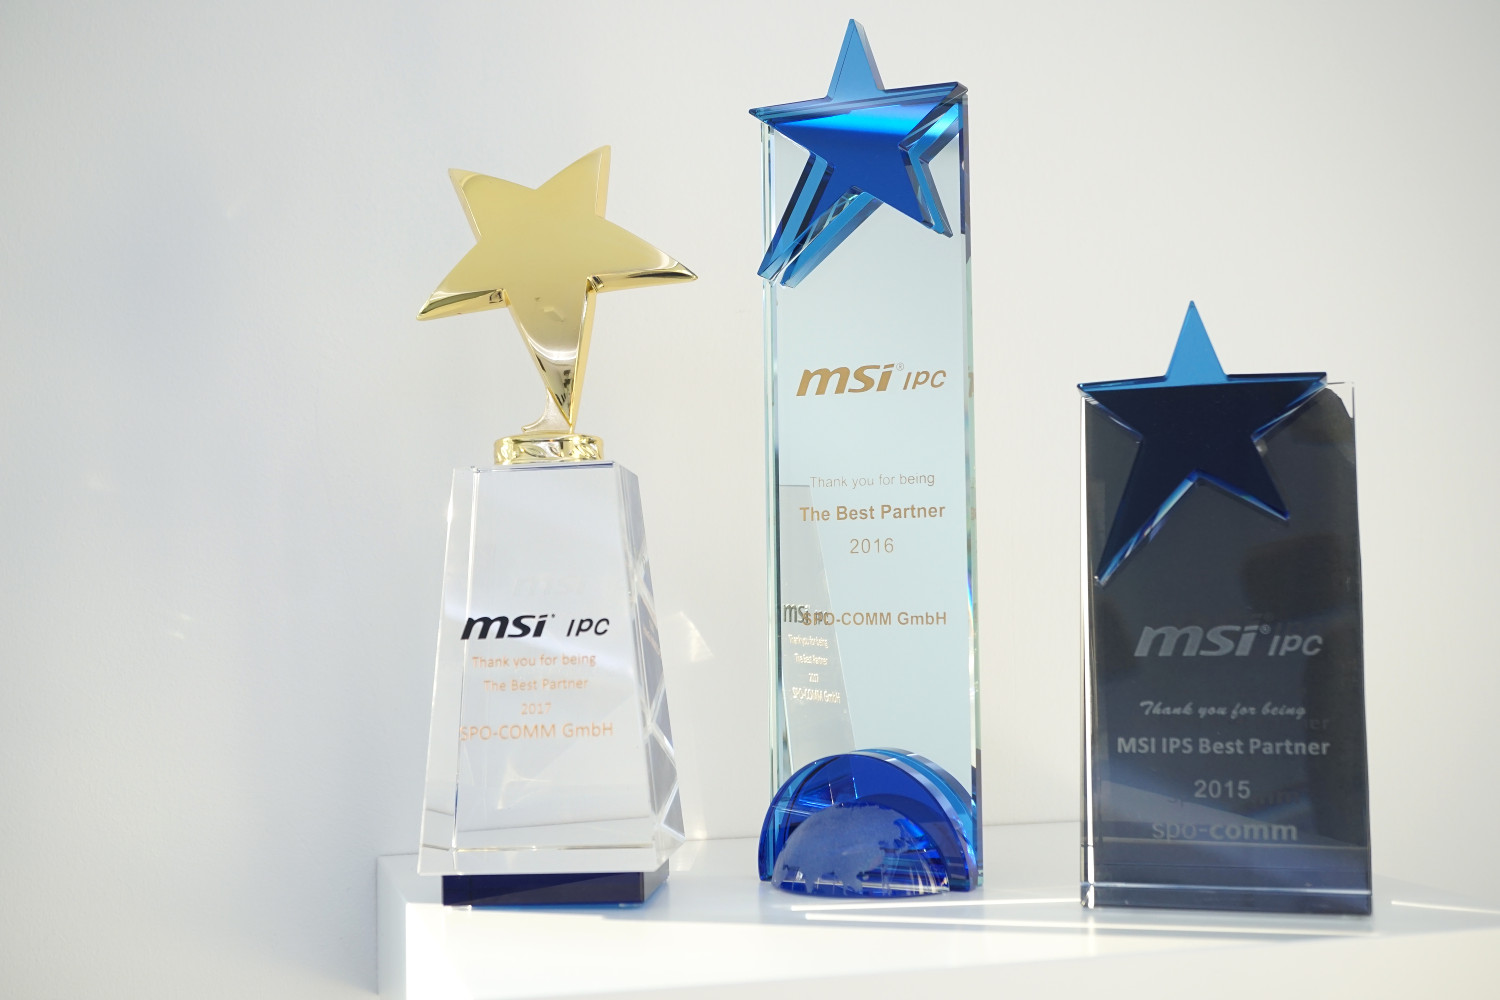 spo-comm was honored with MSI IPC Award in 2017